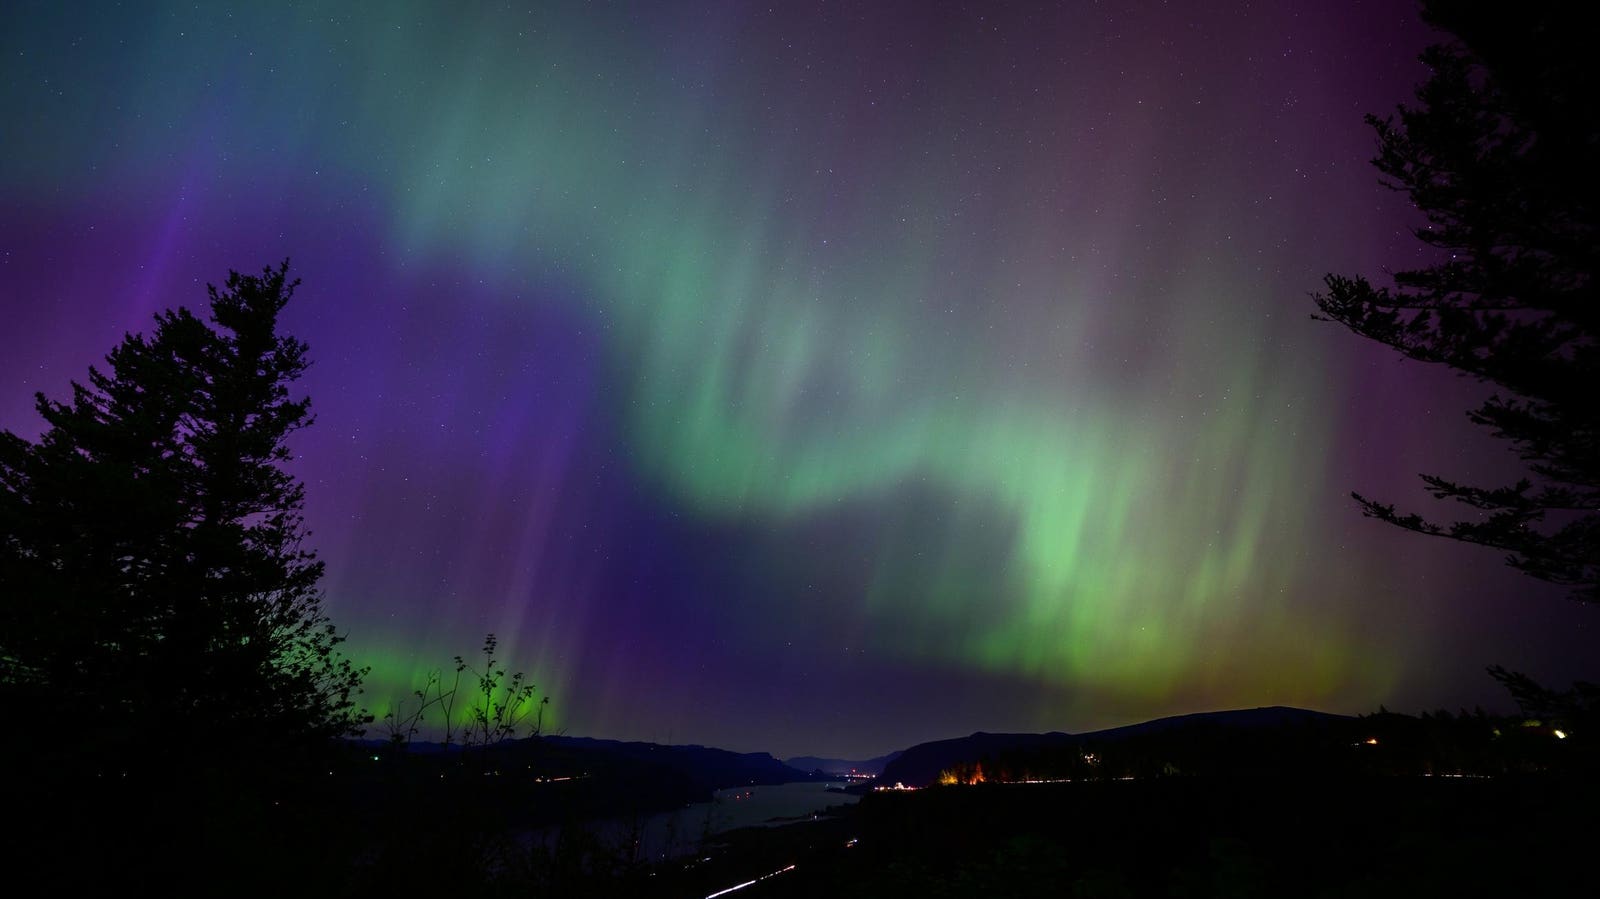 Northern Lights Could Be Visible Again Tonight In Parts Of U.S.: How To See Aurora Borealis